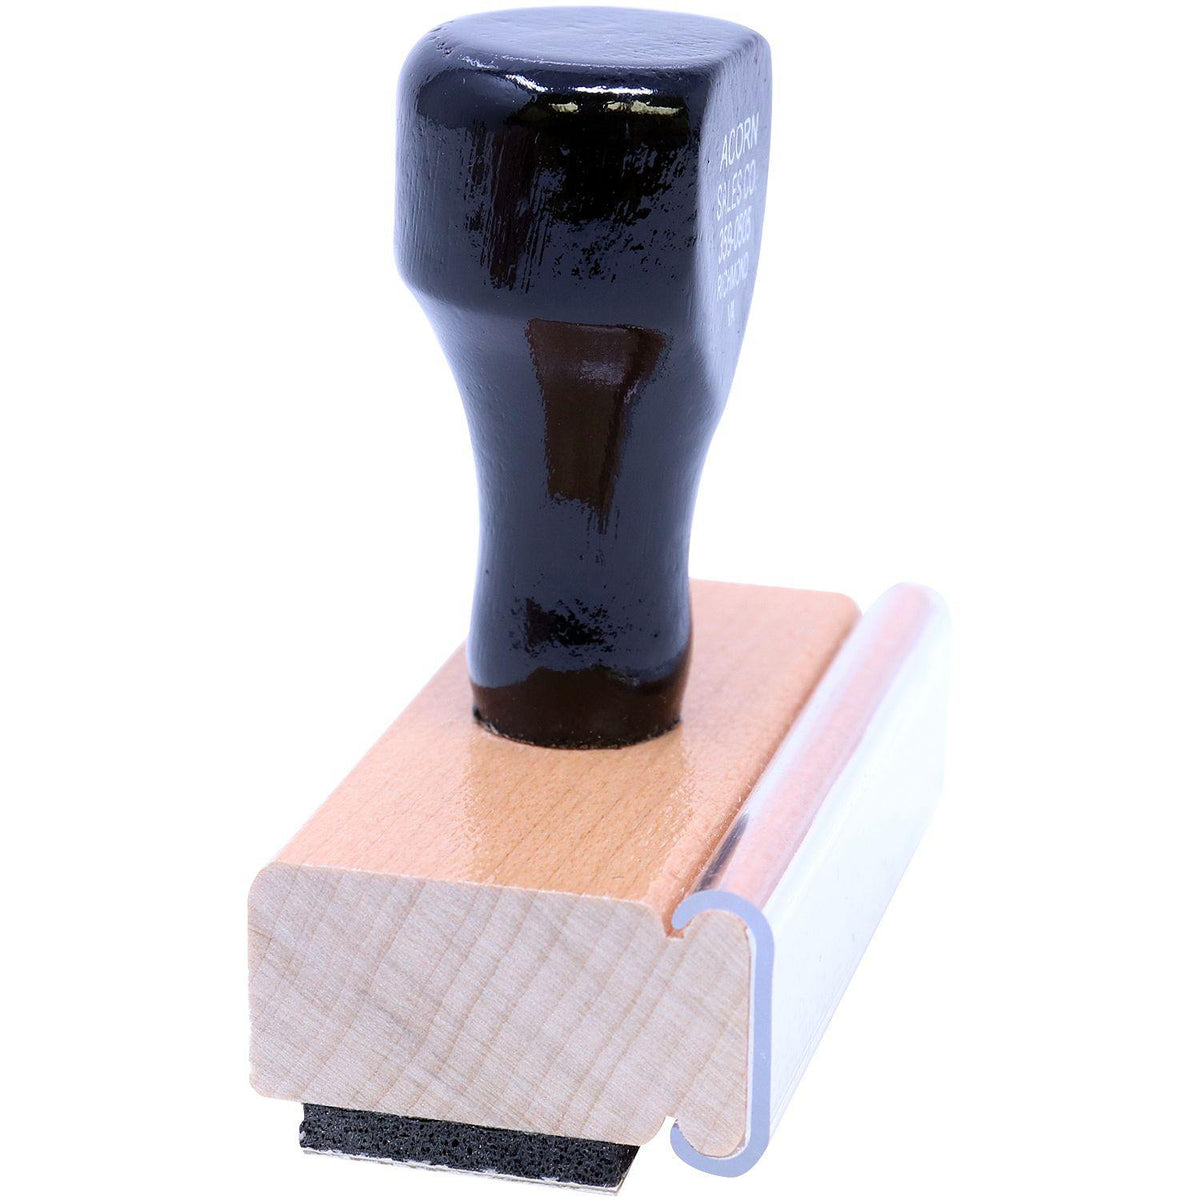 Official Use Only Rubber Stamp - Engineer Seal Stamps - Brand_Acorn, Impression Size_Small, Stamp Type_Regular Stamp, Type of Use_Office